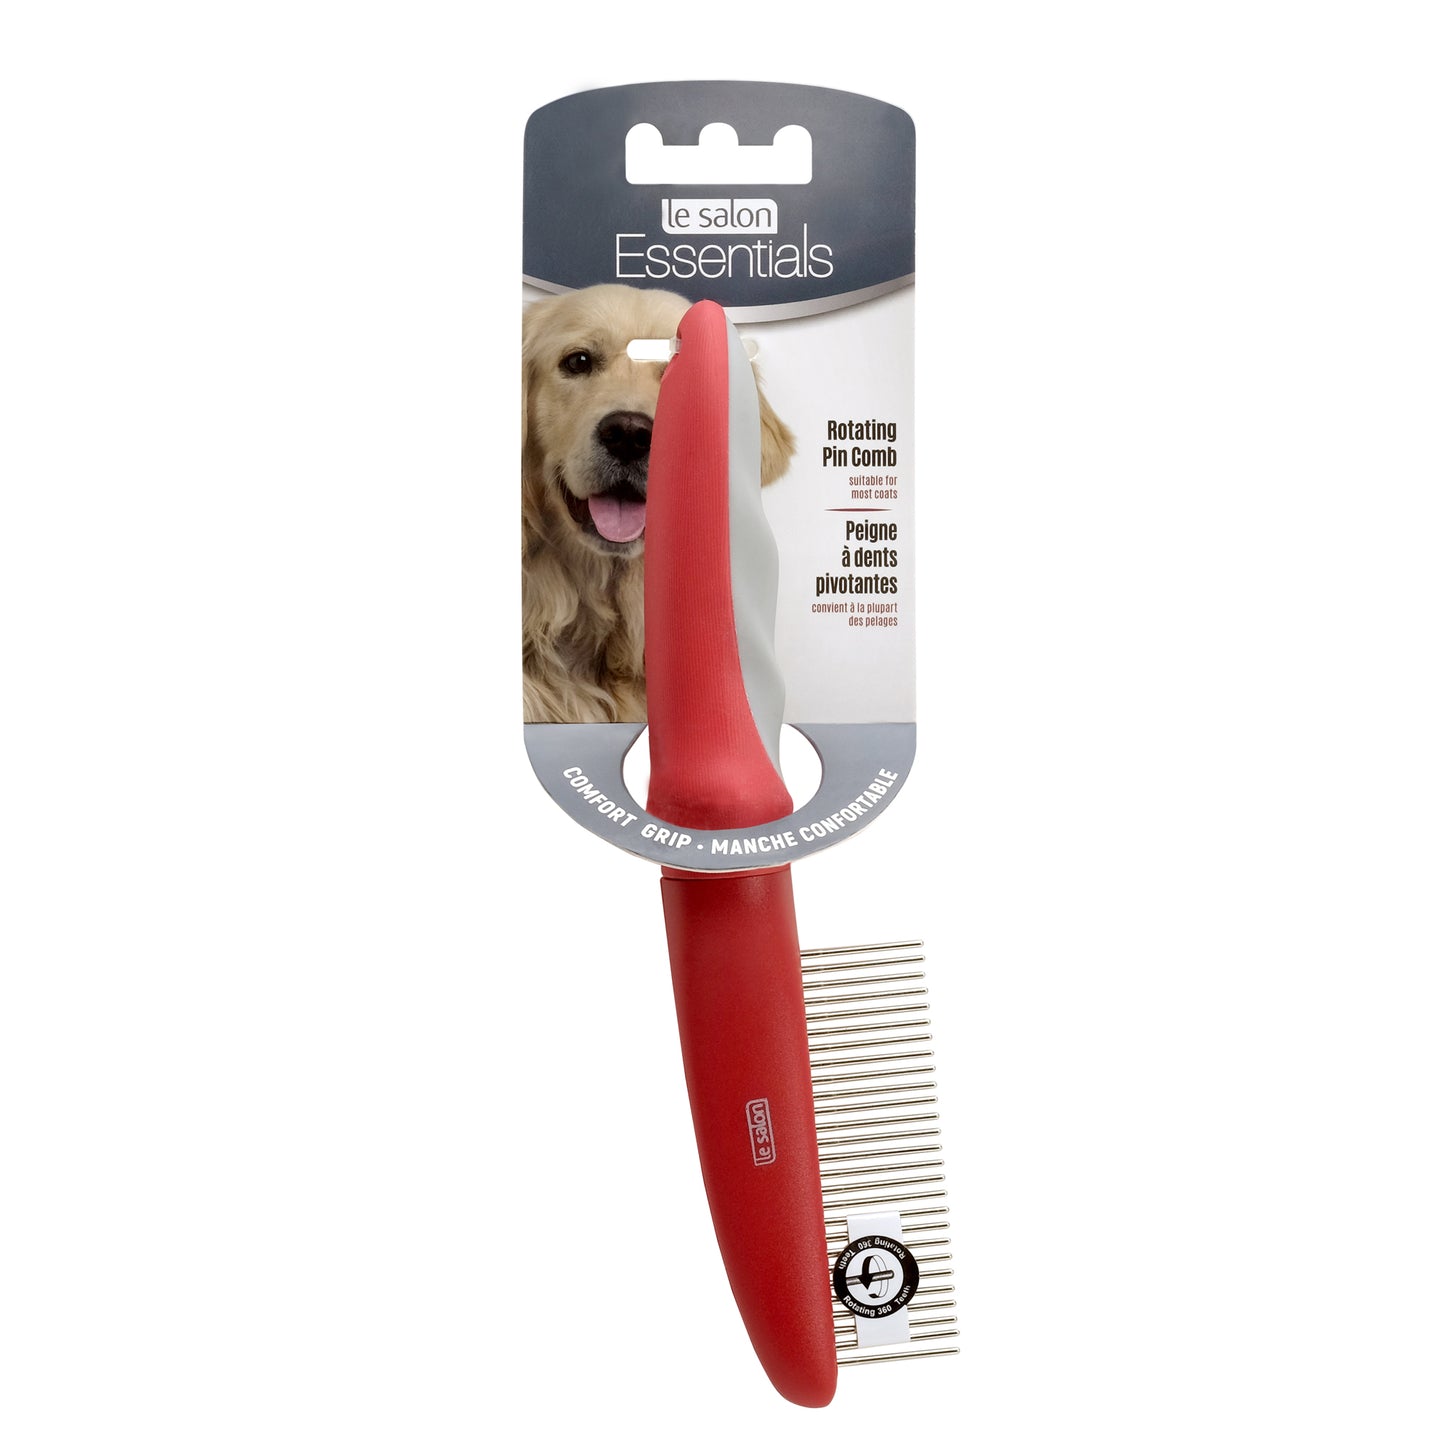 Le Salon Essentials Rotating Pin Comb For Dogs  Grooming  | PetMax Canada